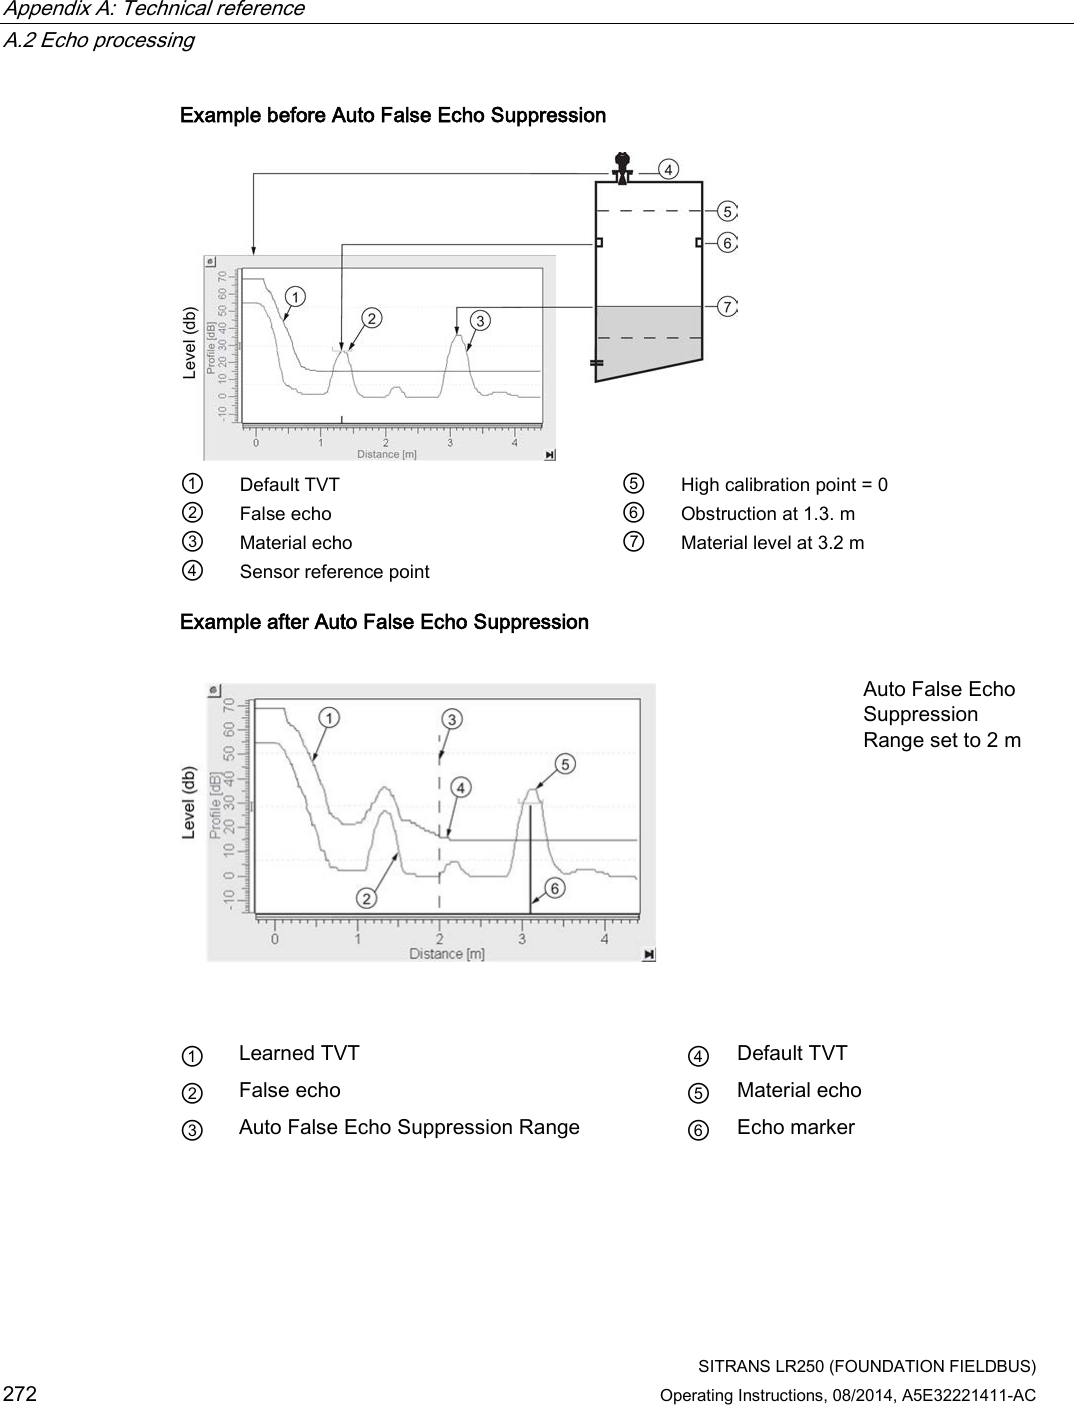 Appendix A: Technical reference   A.2 Echo processing  SITRANS LR250 (FOUNDATION FIELDBUS) 272 Operating Instructions, 08/2014, A5E32221411-AC Example before Auto False Echo Suppression  ① Default TVT ⑤ High calibration point = 0 ② False echo ⑥ Obstruction at 1.3. m ③ Material echo ⑦ Material level at 3.2 m ④ Sensor reference point   Example after Auto False Echo Suppression   Auto False Echo Suppression Range set to 2 m   ① Learned TVT ④ Default TVT ② False echo ⑤ Material echo ③ Auto False Echo Suppression Range ⑥ Echo marker 